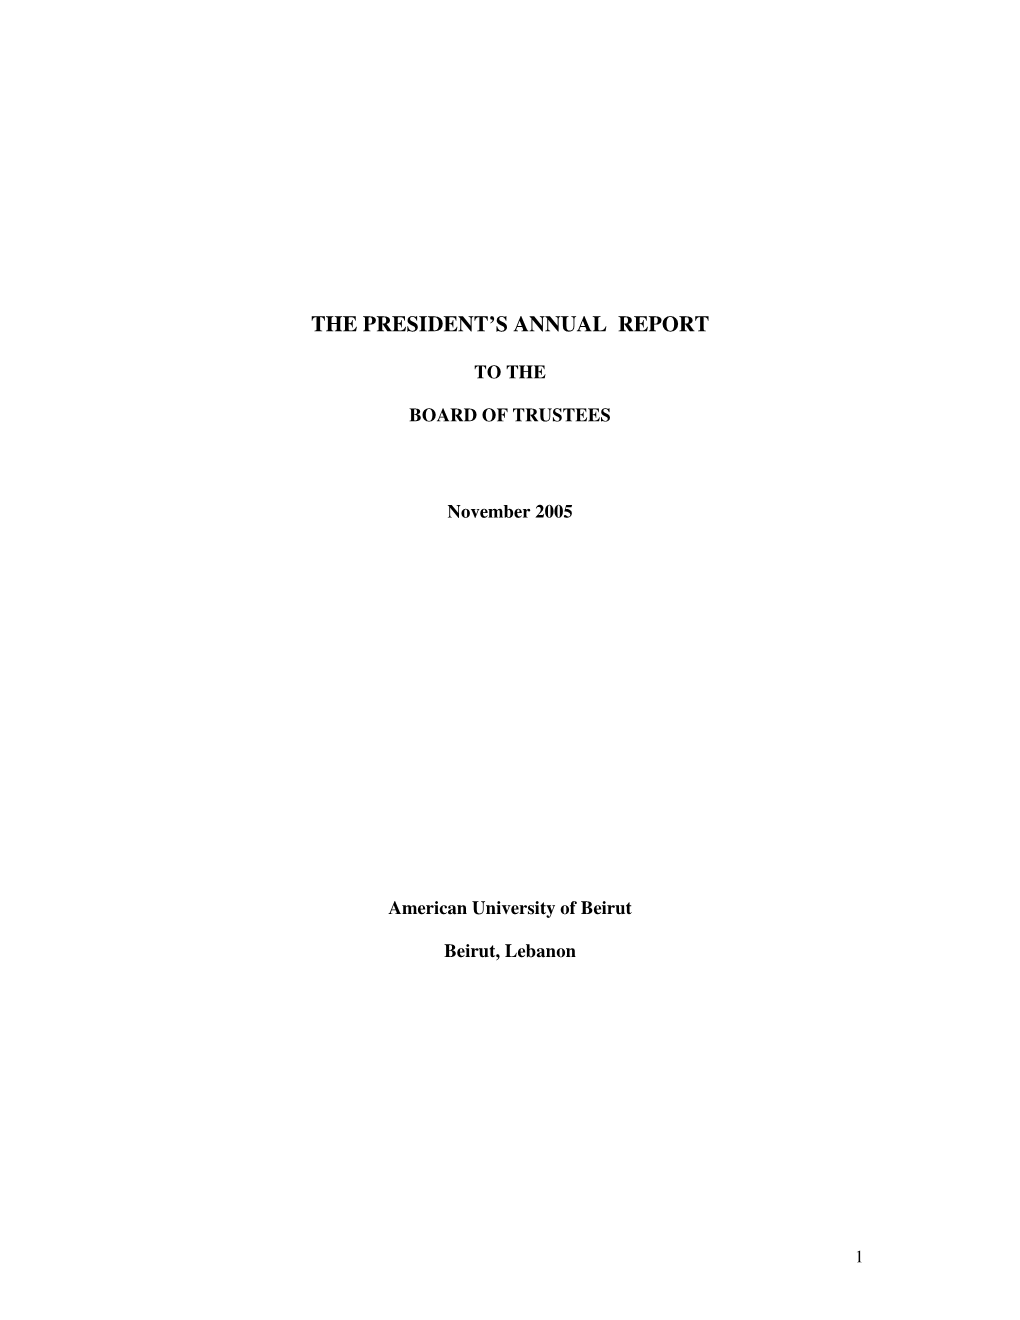 The President's Annual Report